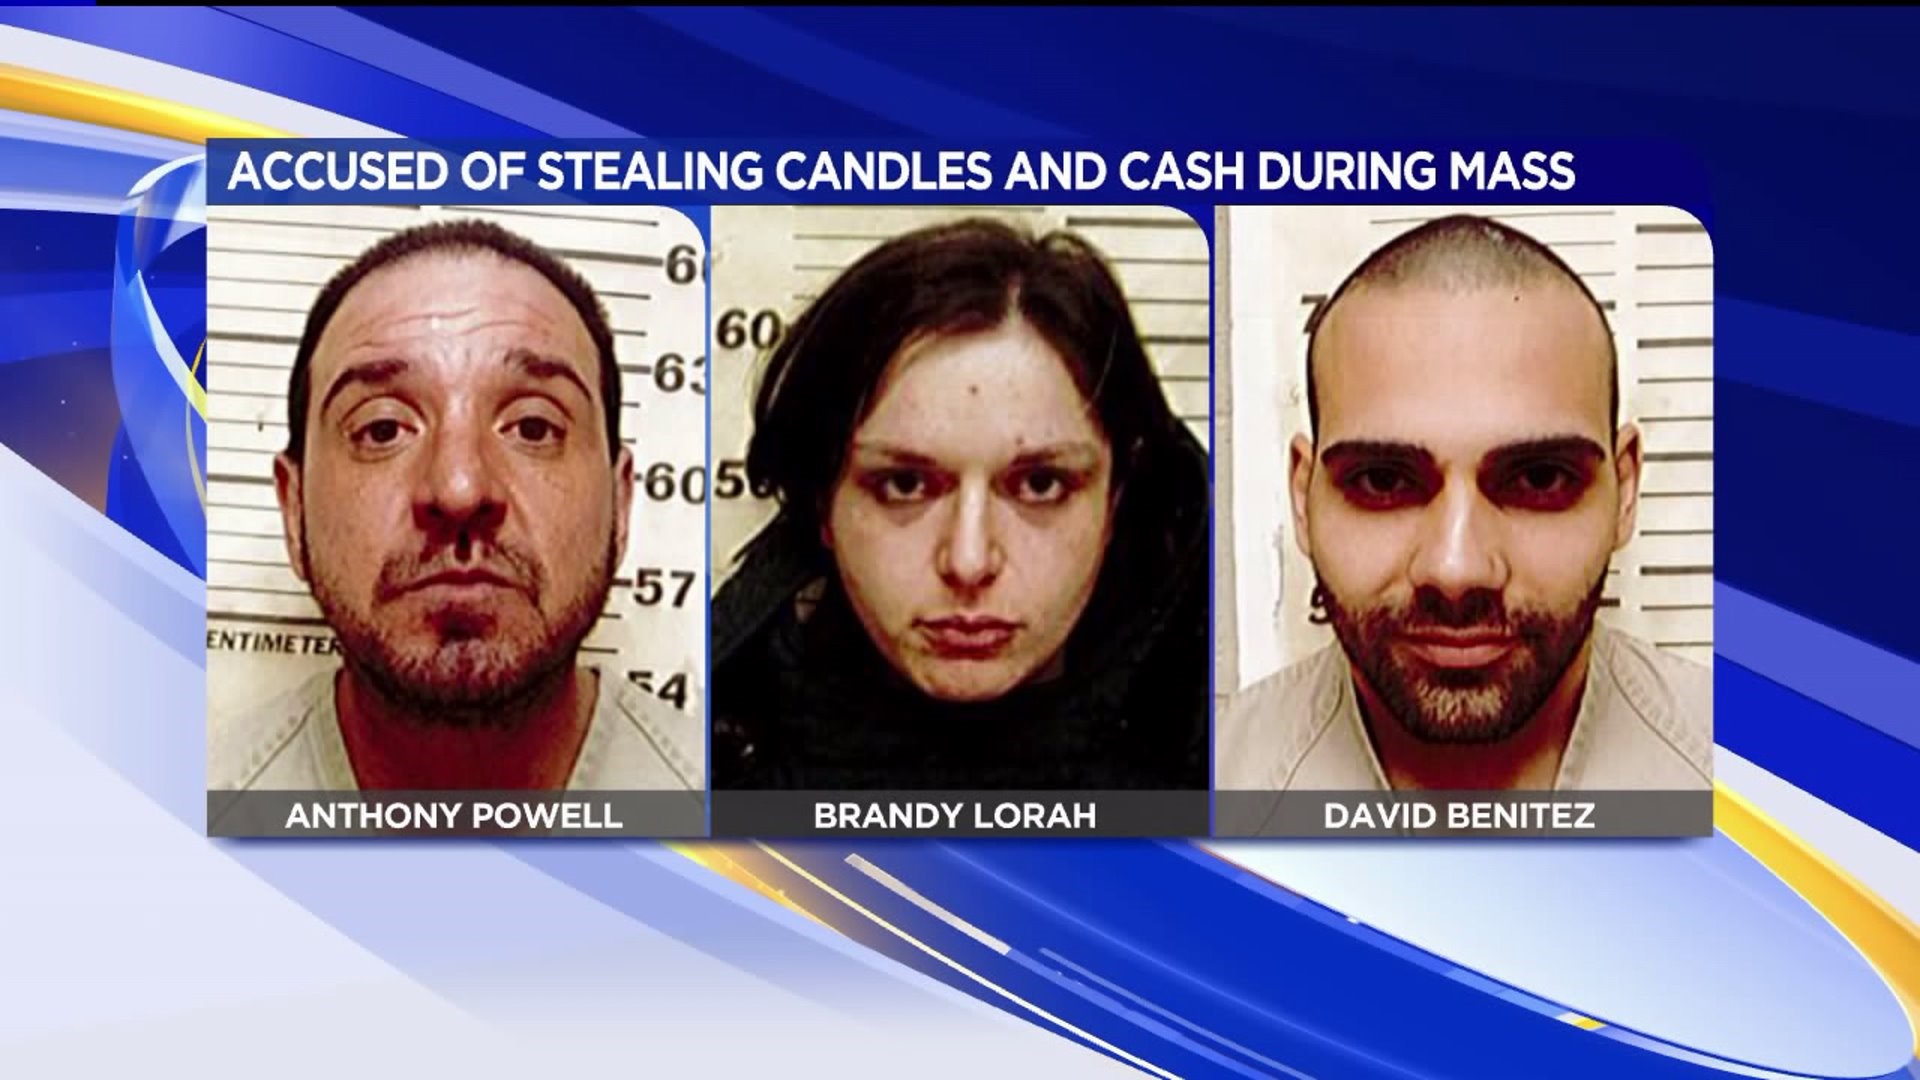 Three Locked Up Accused of Stealing From Church During Mass